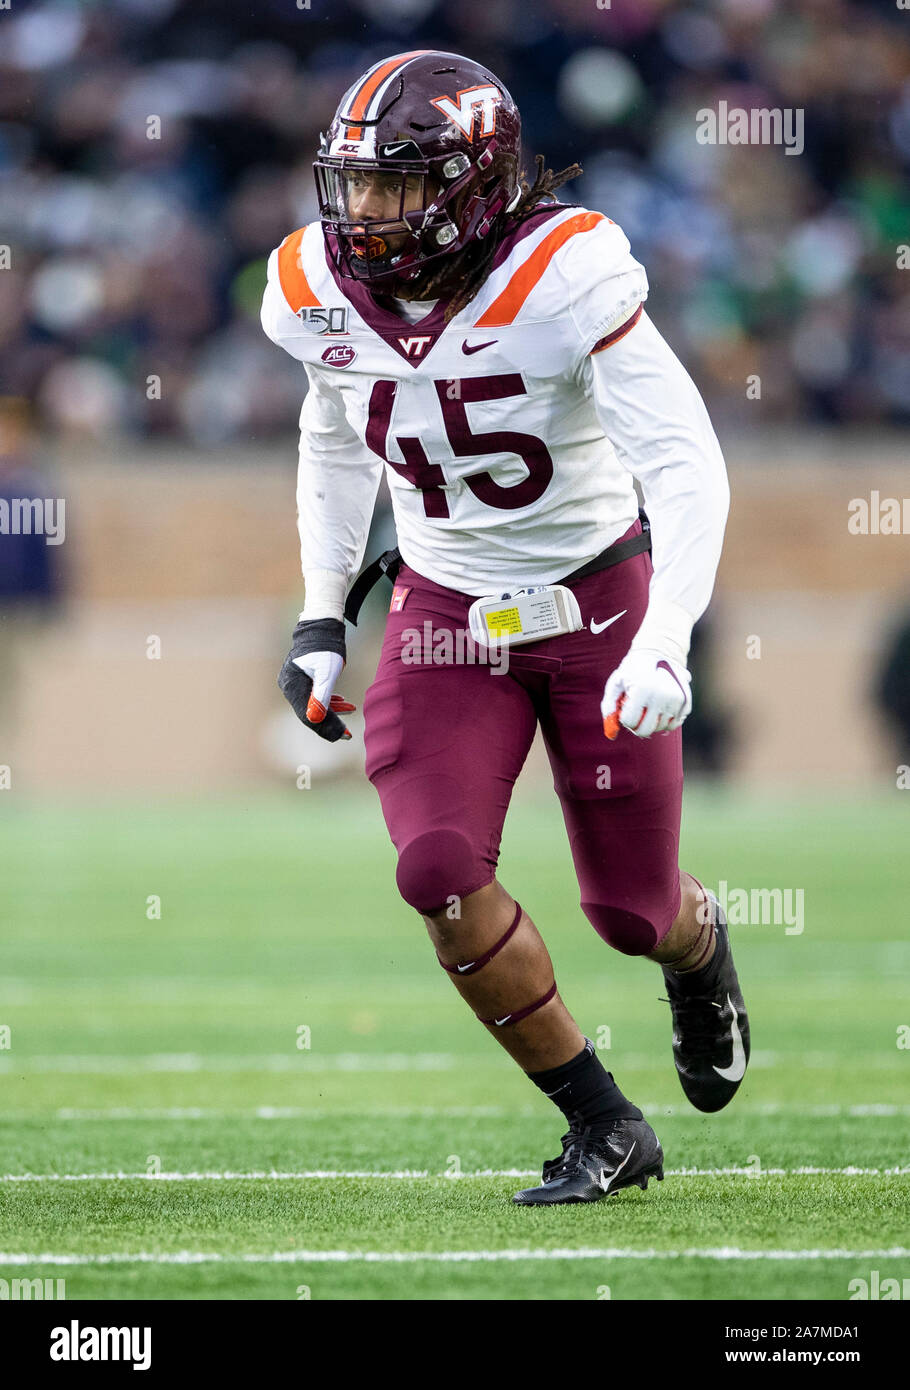 November 02, 2019: Virginia Tech defensive lineman TyJuan Garbutt (45) during NCAA football game action between the Virginia Tech Hokies and the Notre Dame Fighting Irish at Notre Dame Stadium in South Bend, Indiana. Notre Dame defeated Virginia Tech 21-20. John Mersits/CSM. Stock Photo